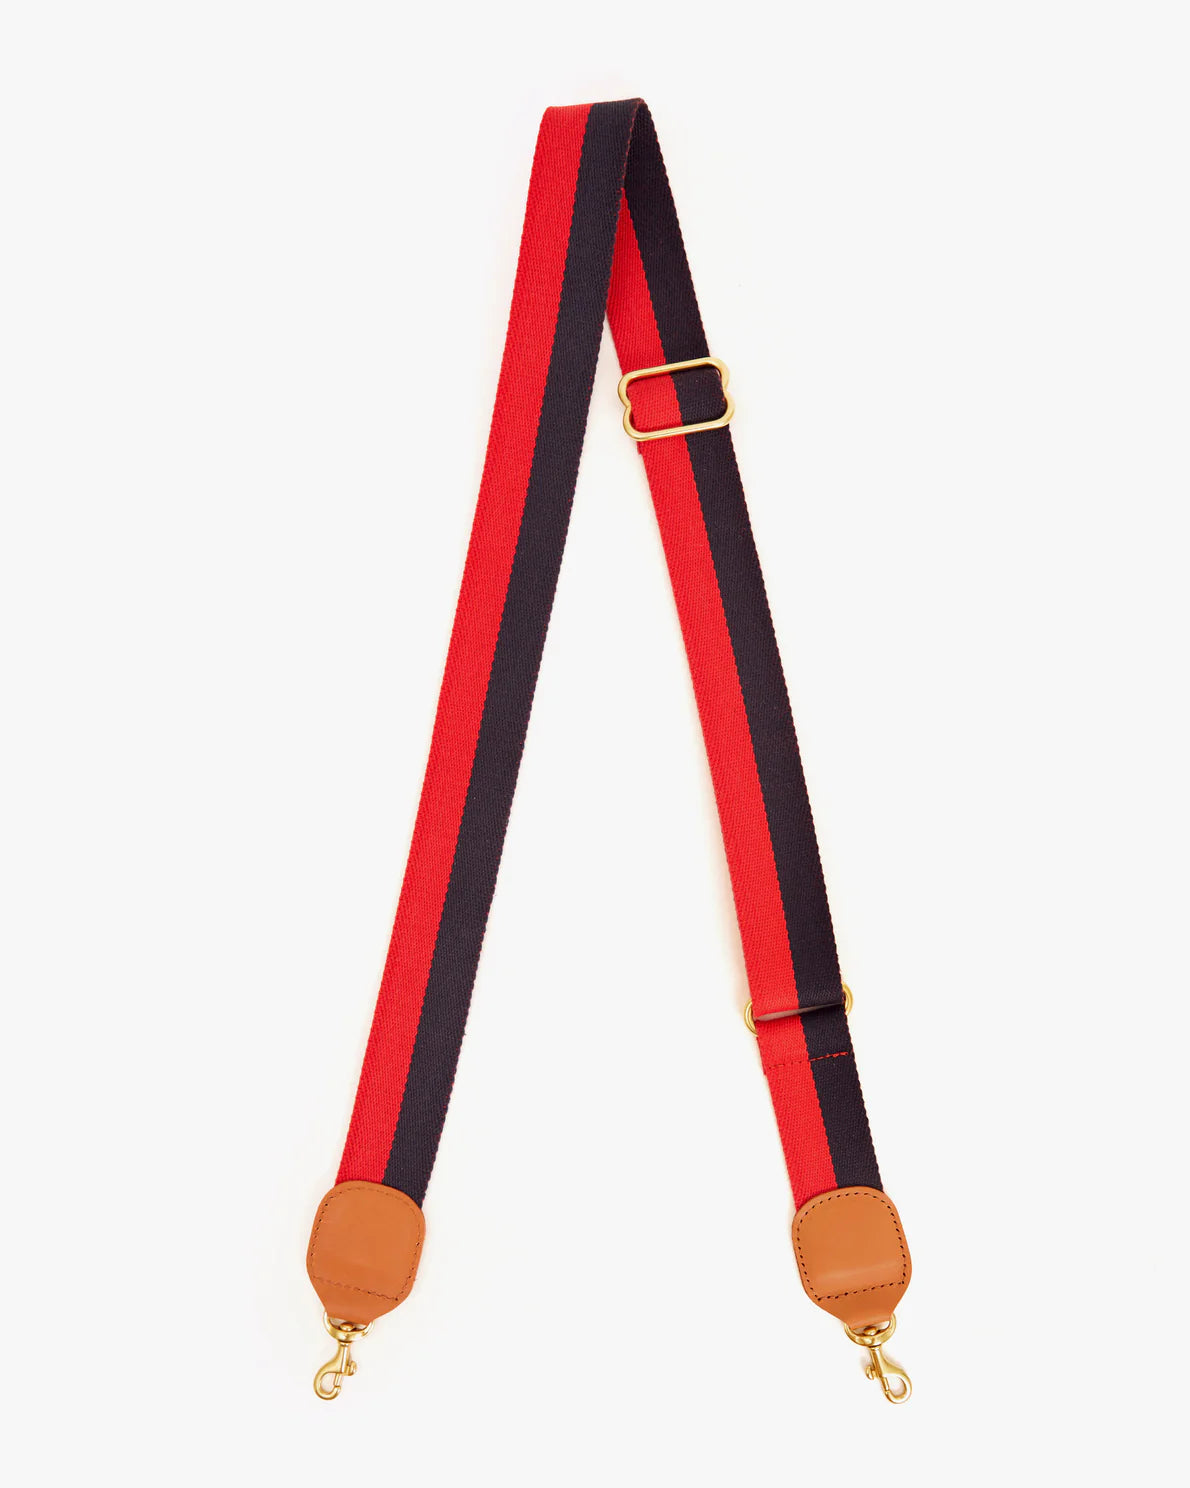 A pair of red and navy striped Crossbody Straps by Clare Vivier with leather attachments and brass snap hooks, displayed against a white background.